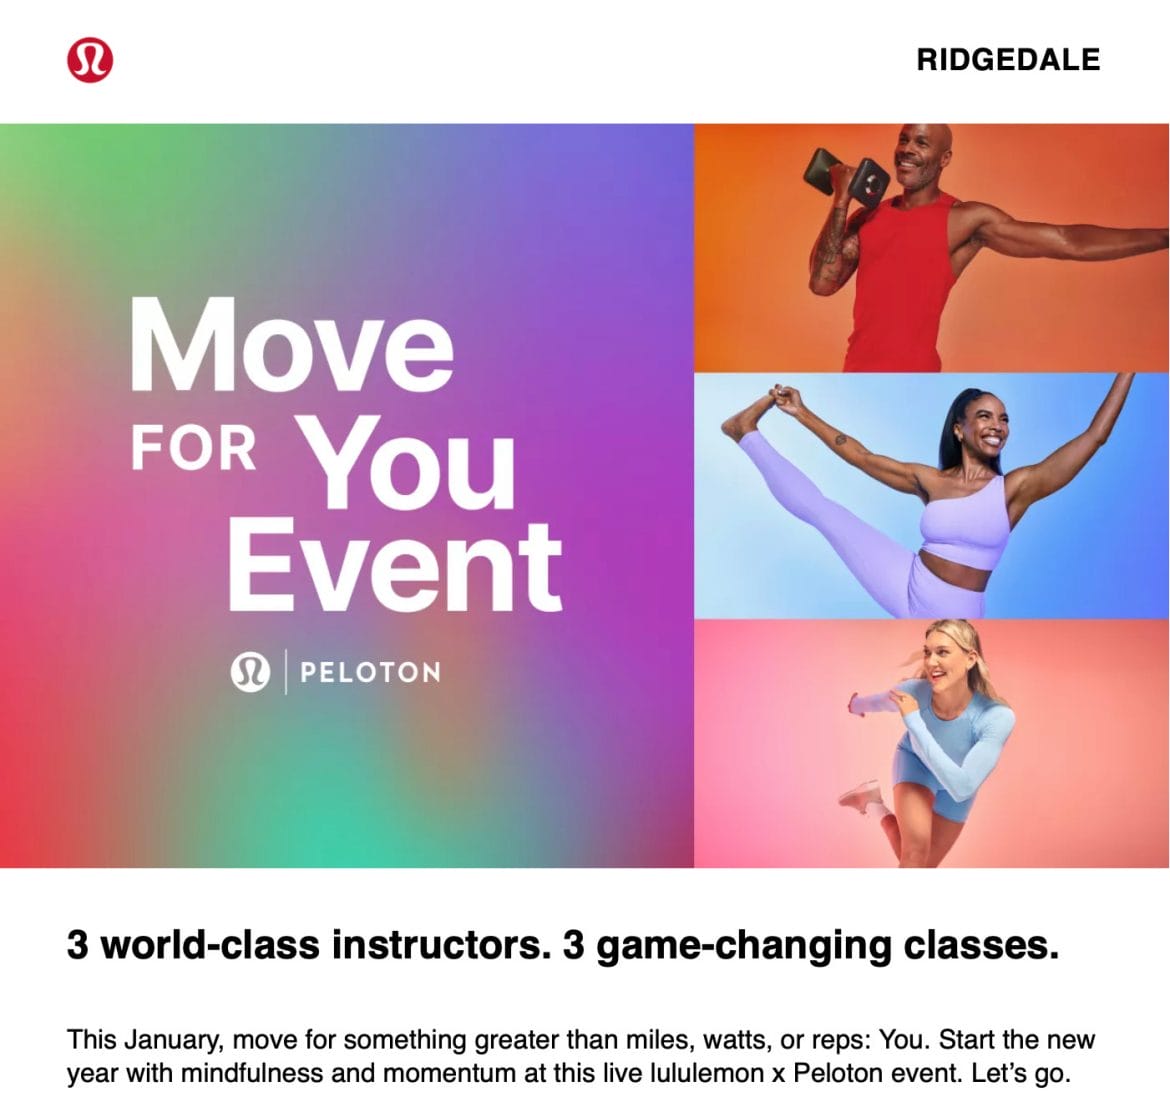 lululemon email promoting Move for You event.